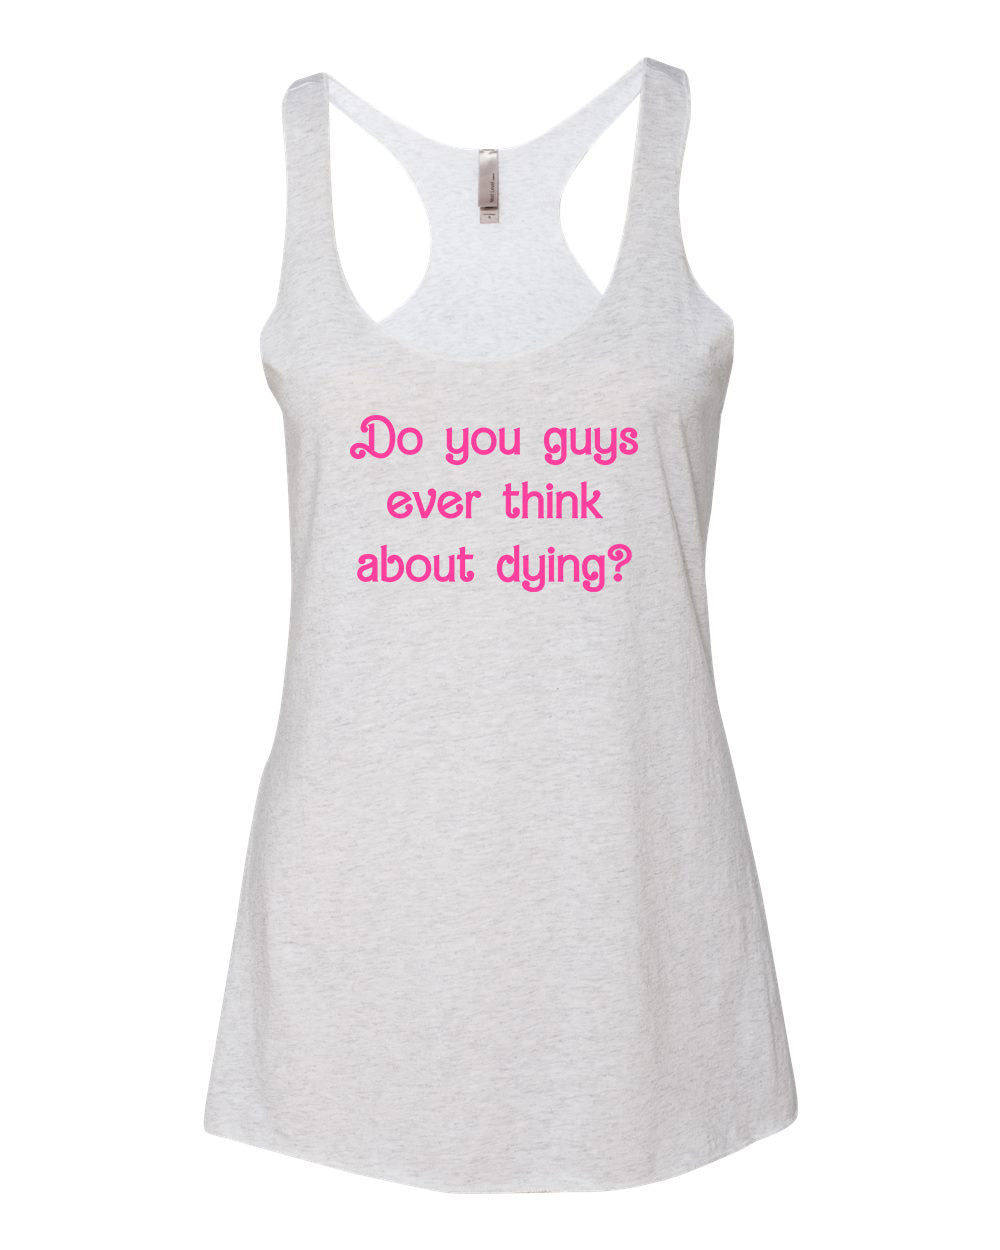 Do You Guys Ever Think About Dying? - Women's Tank - White with Pink Ink